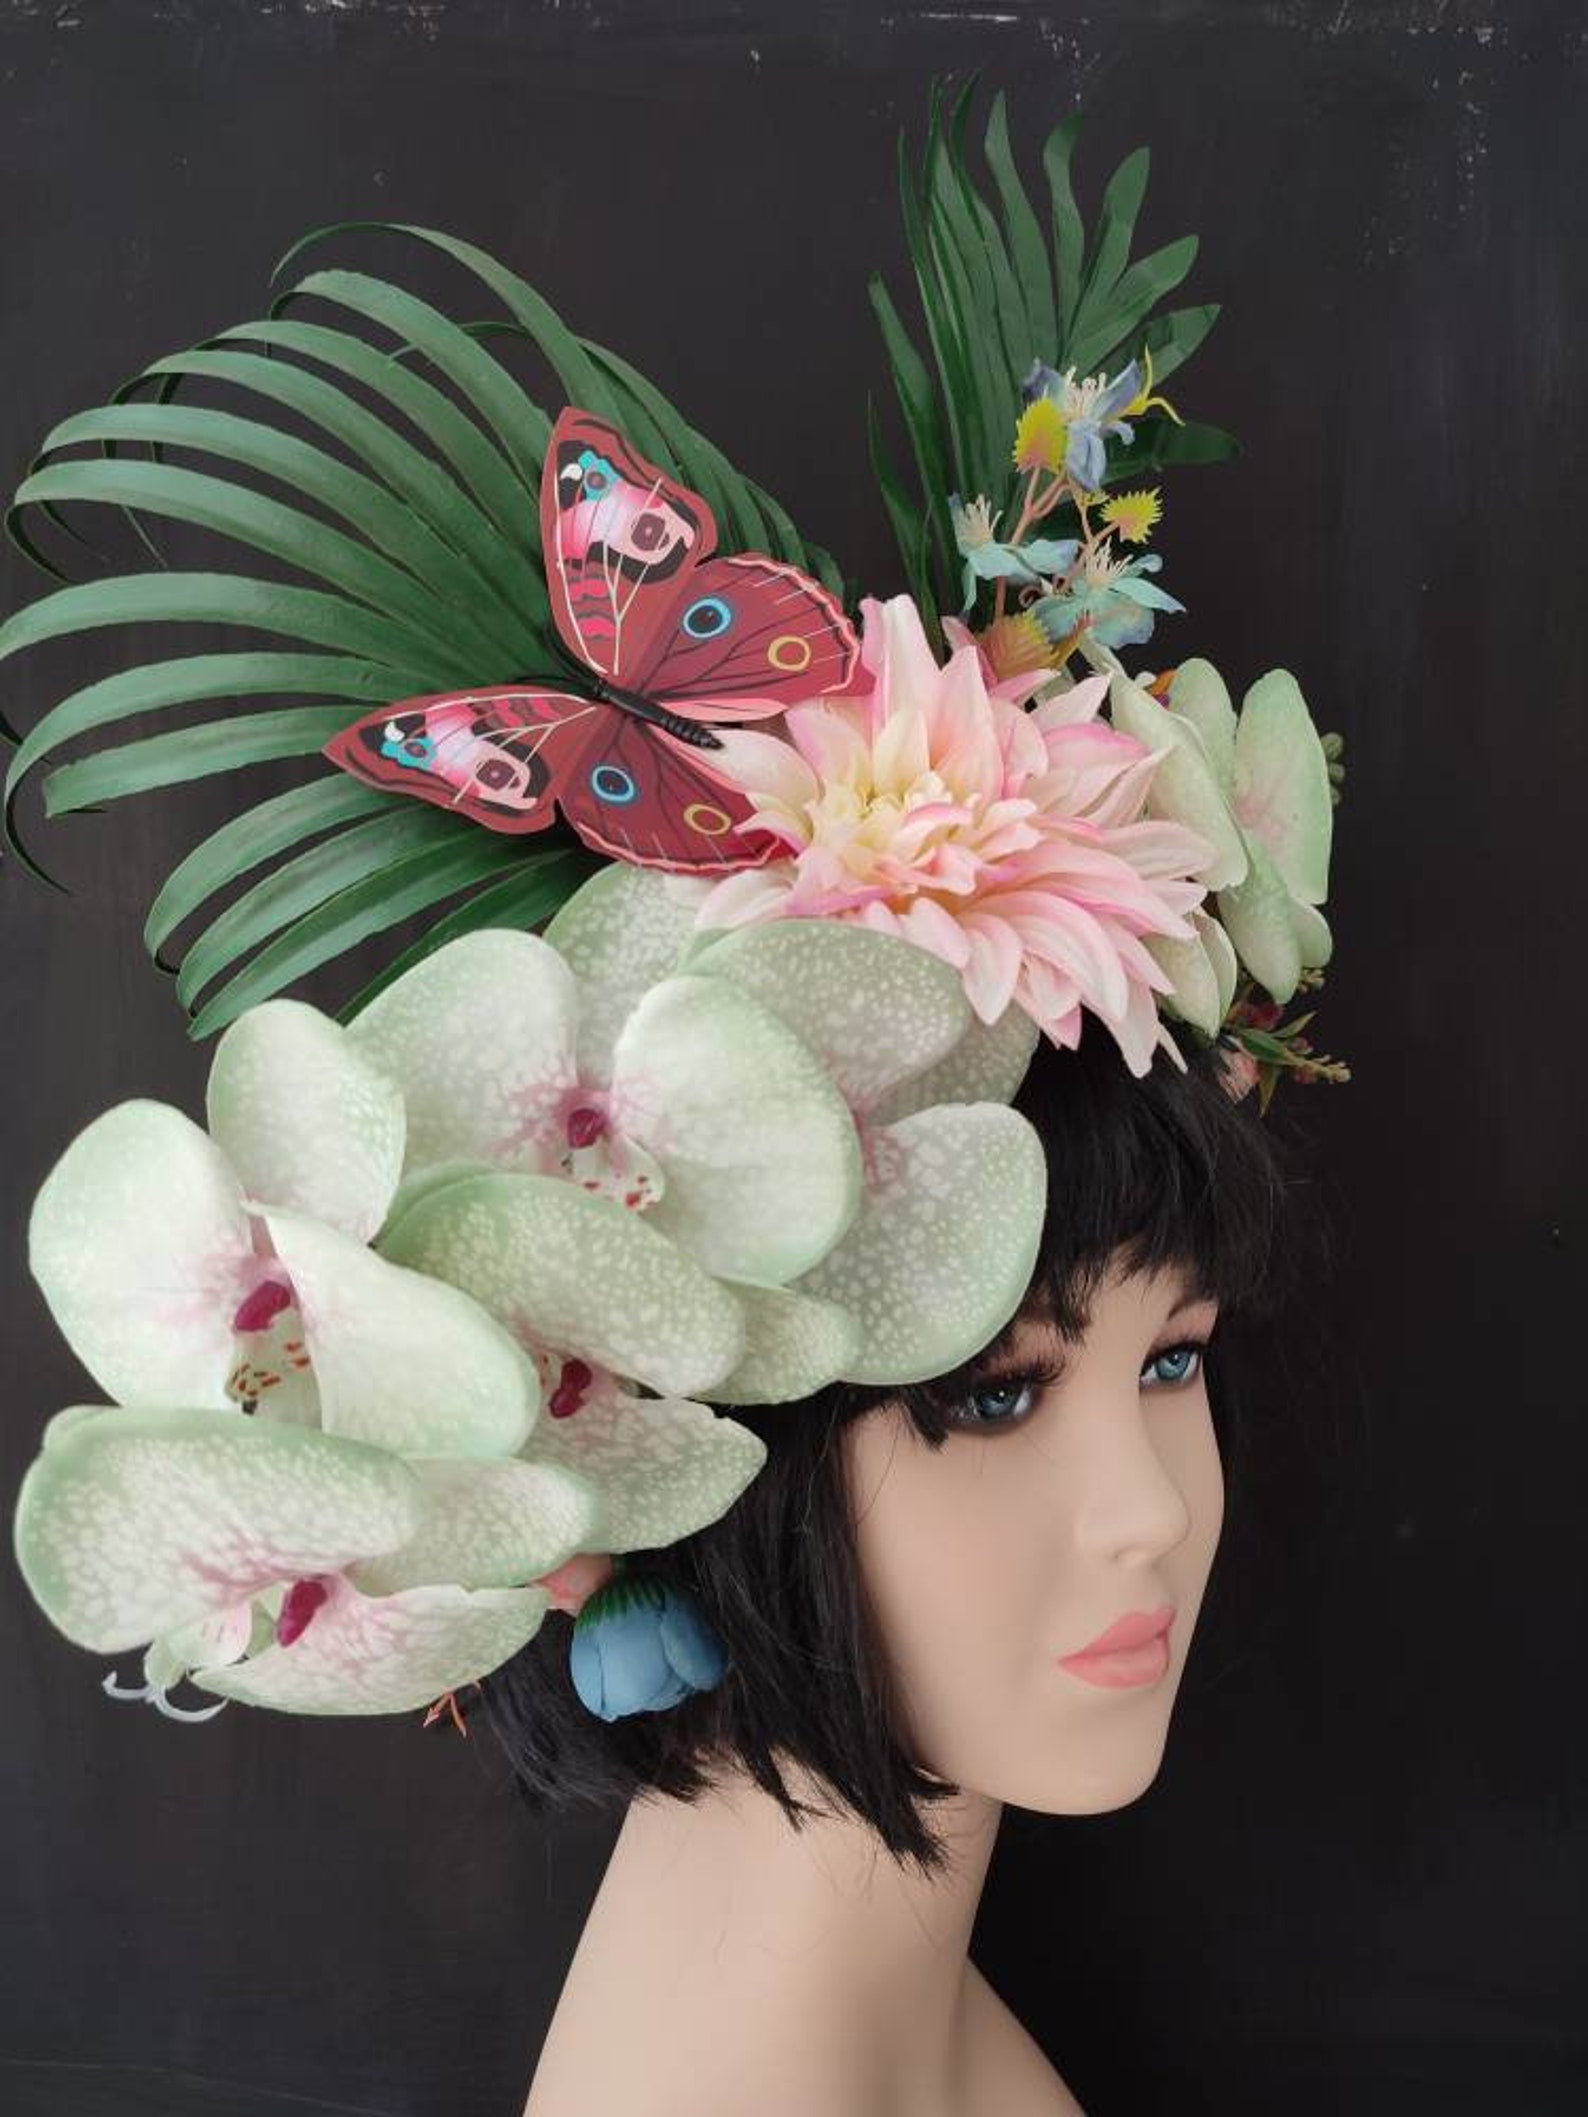 Tropical Headdress With Orchids Hawaiian Flower Crown Large Etsy